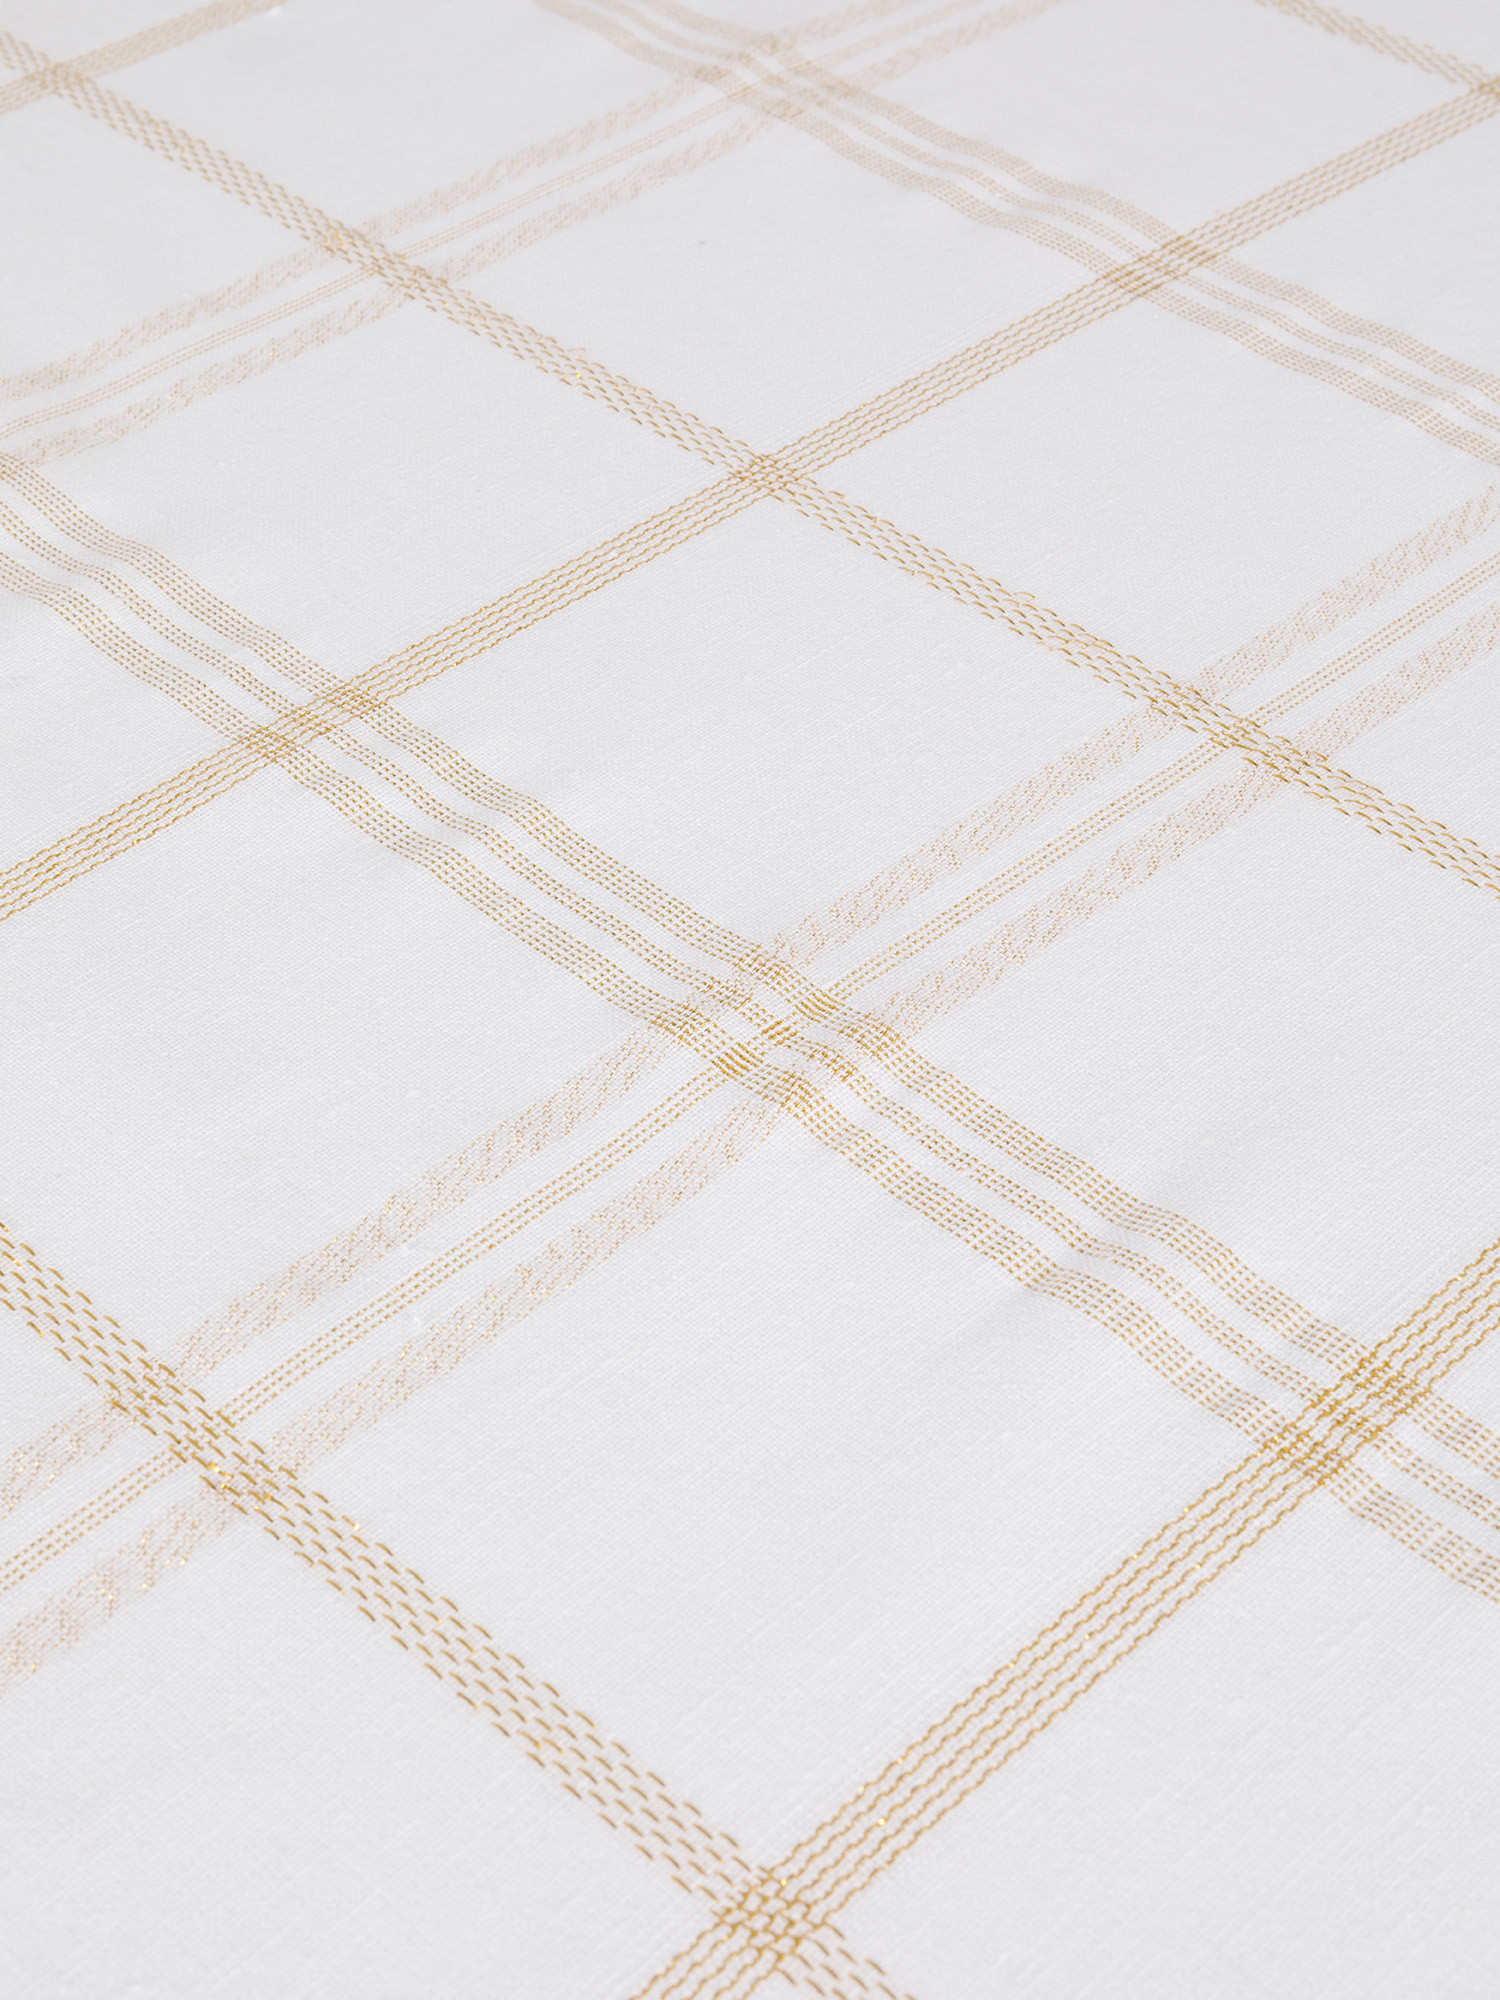 Lurex check pattern cotton tablecloth, White, large image number 1